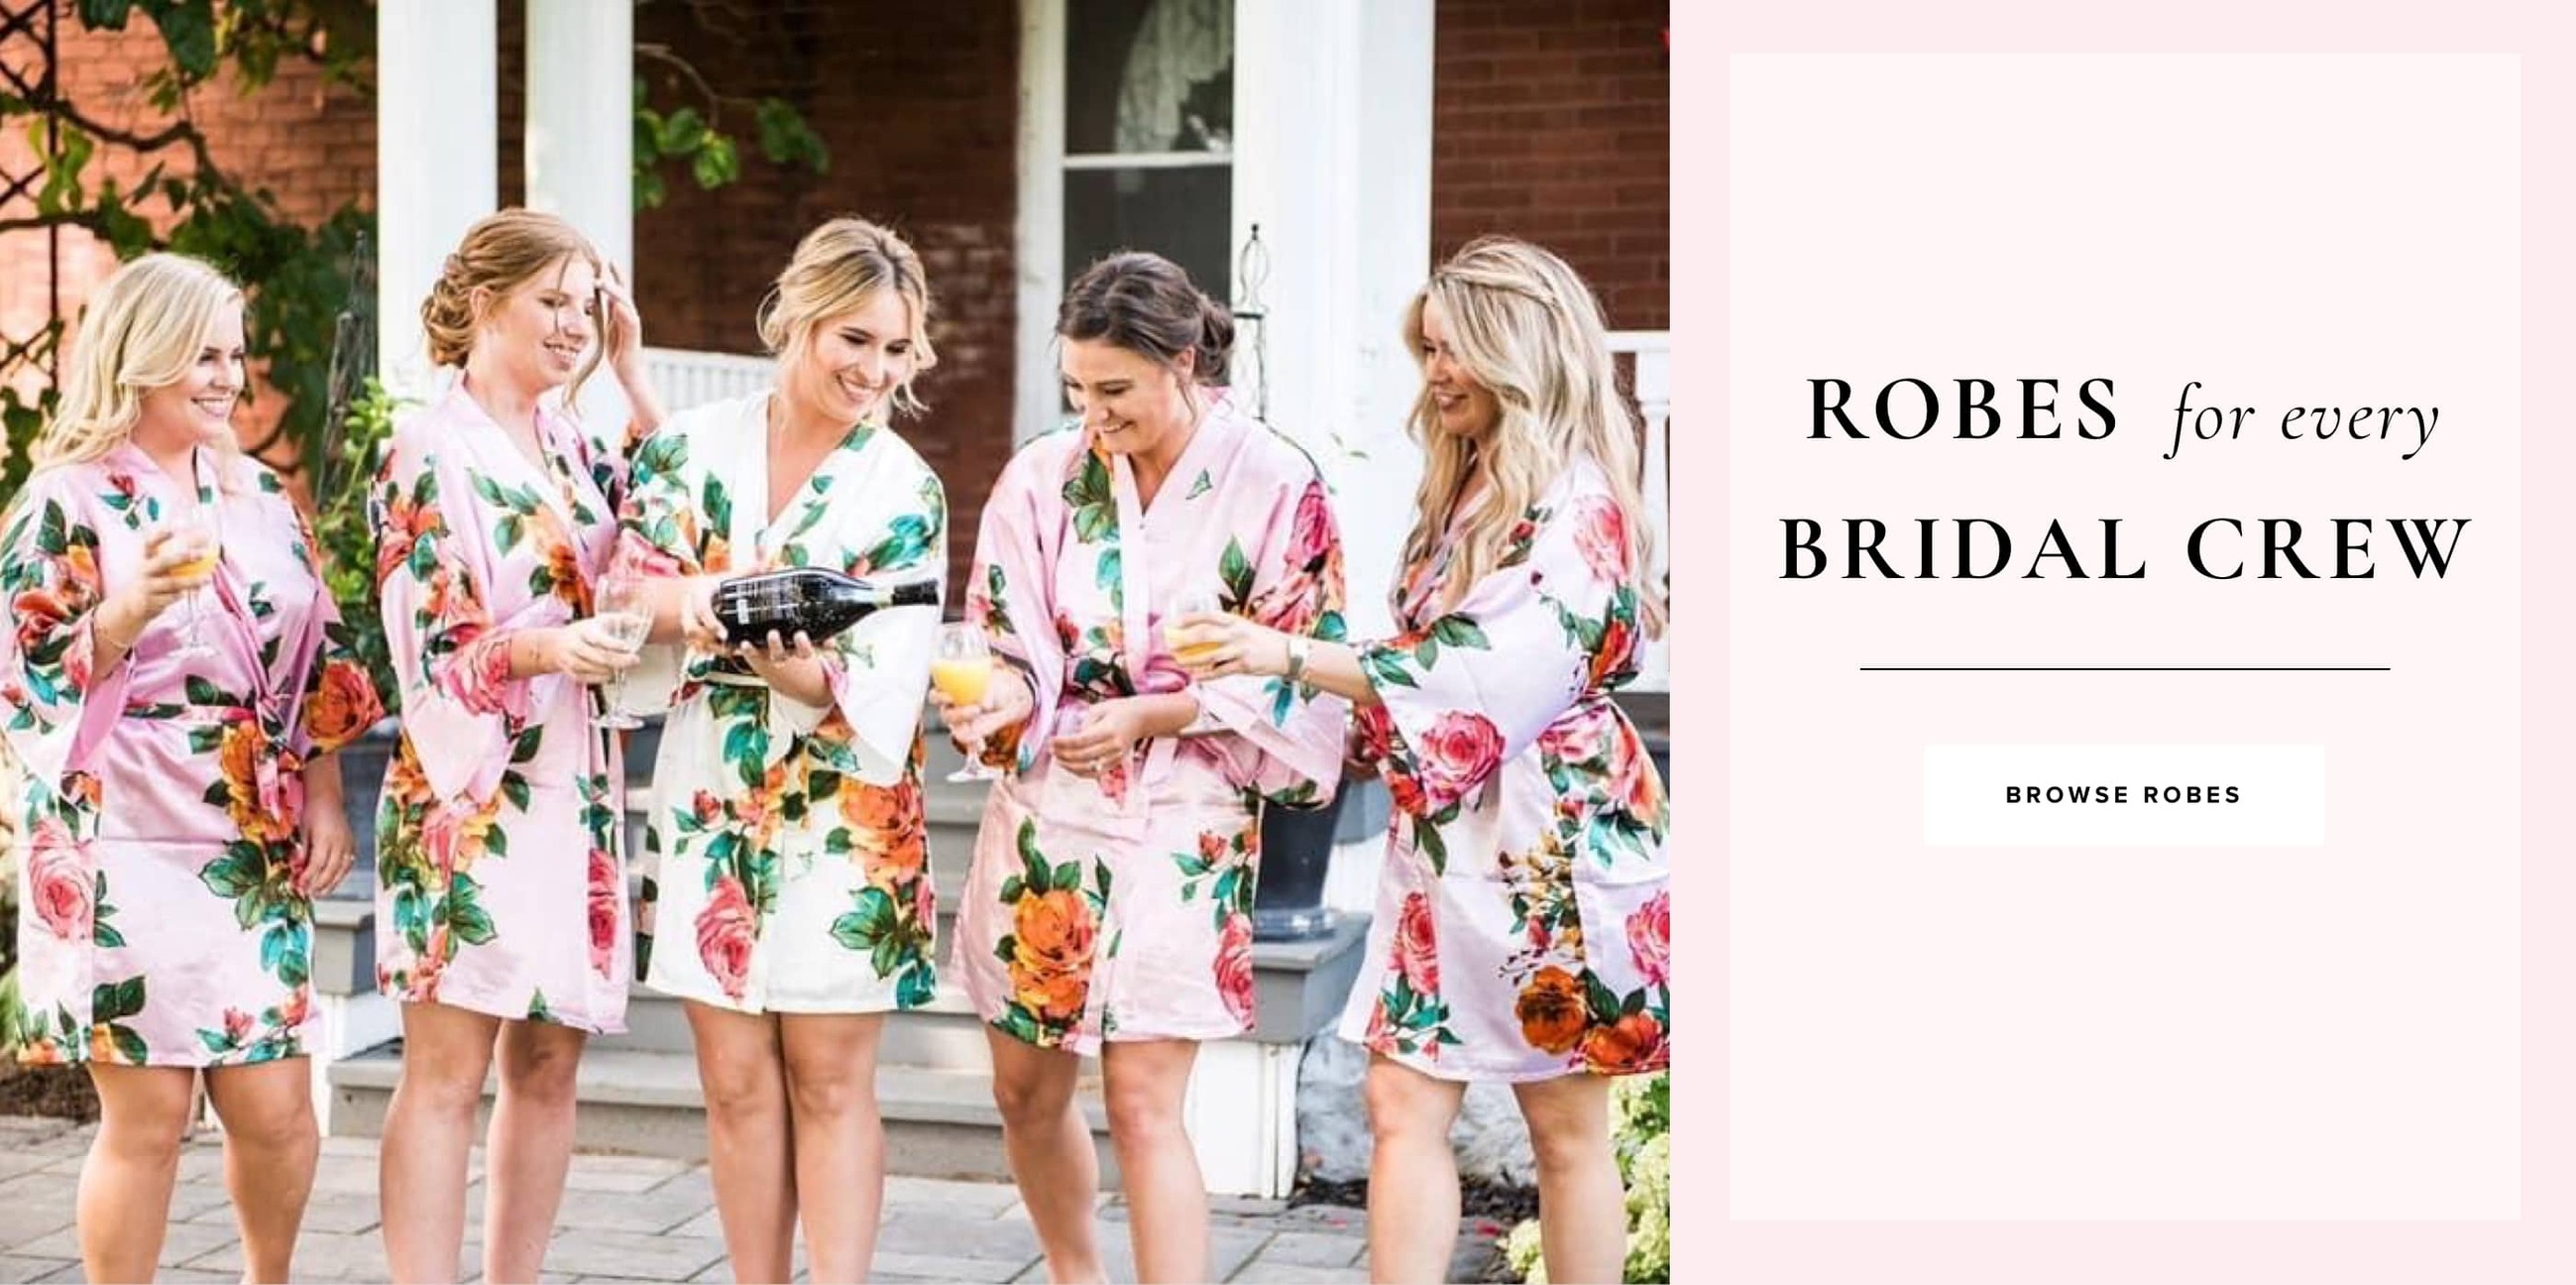 Brides and her bridal party in wedding robes